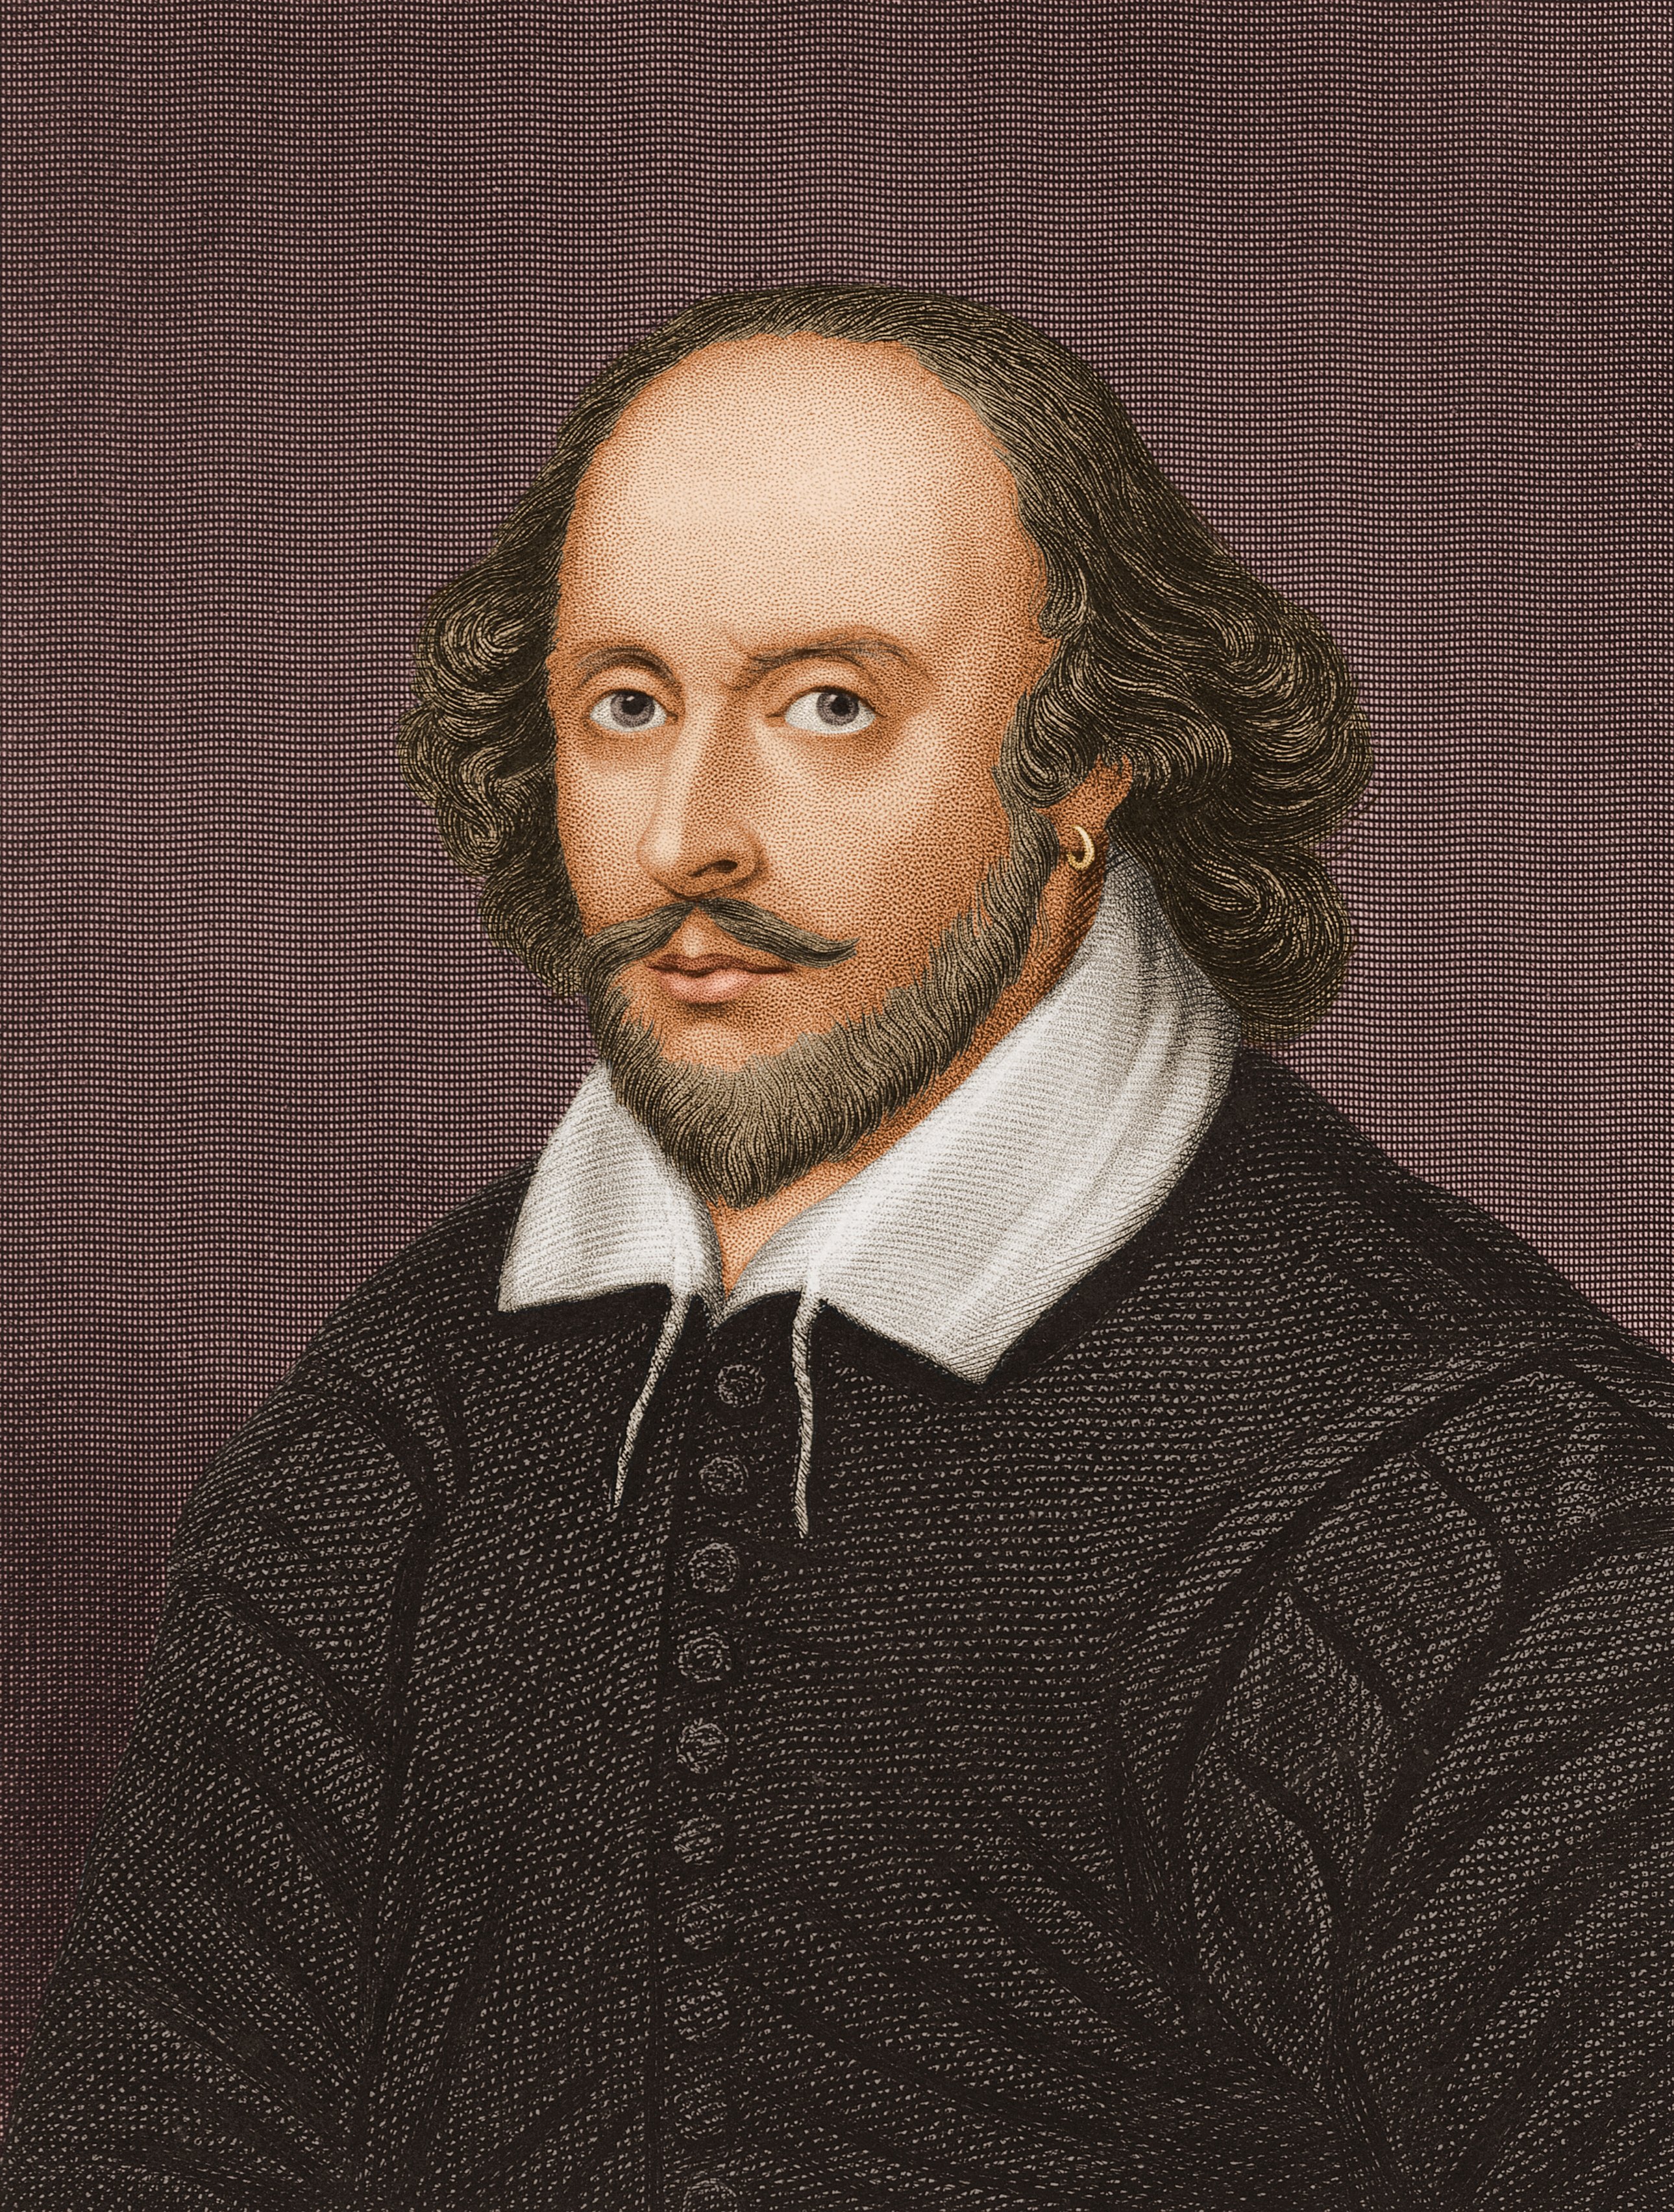 World famous English playwright and poet William Shakespeare in the year 1600. / Source: Getty Images